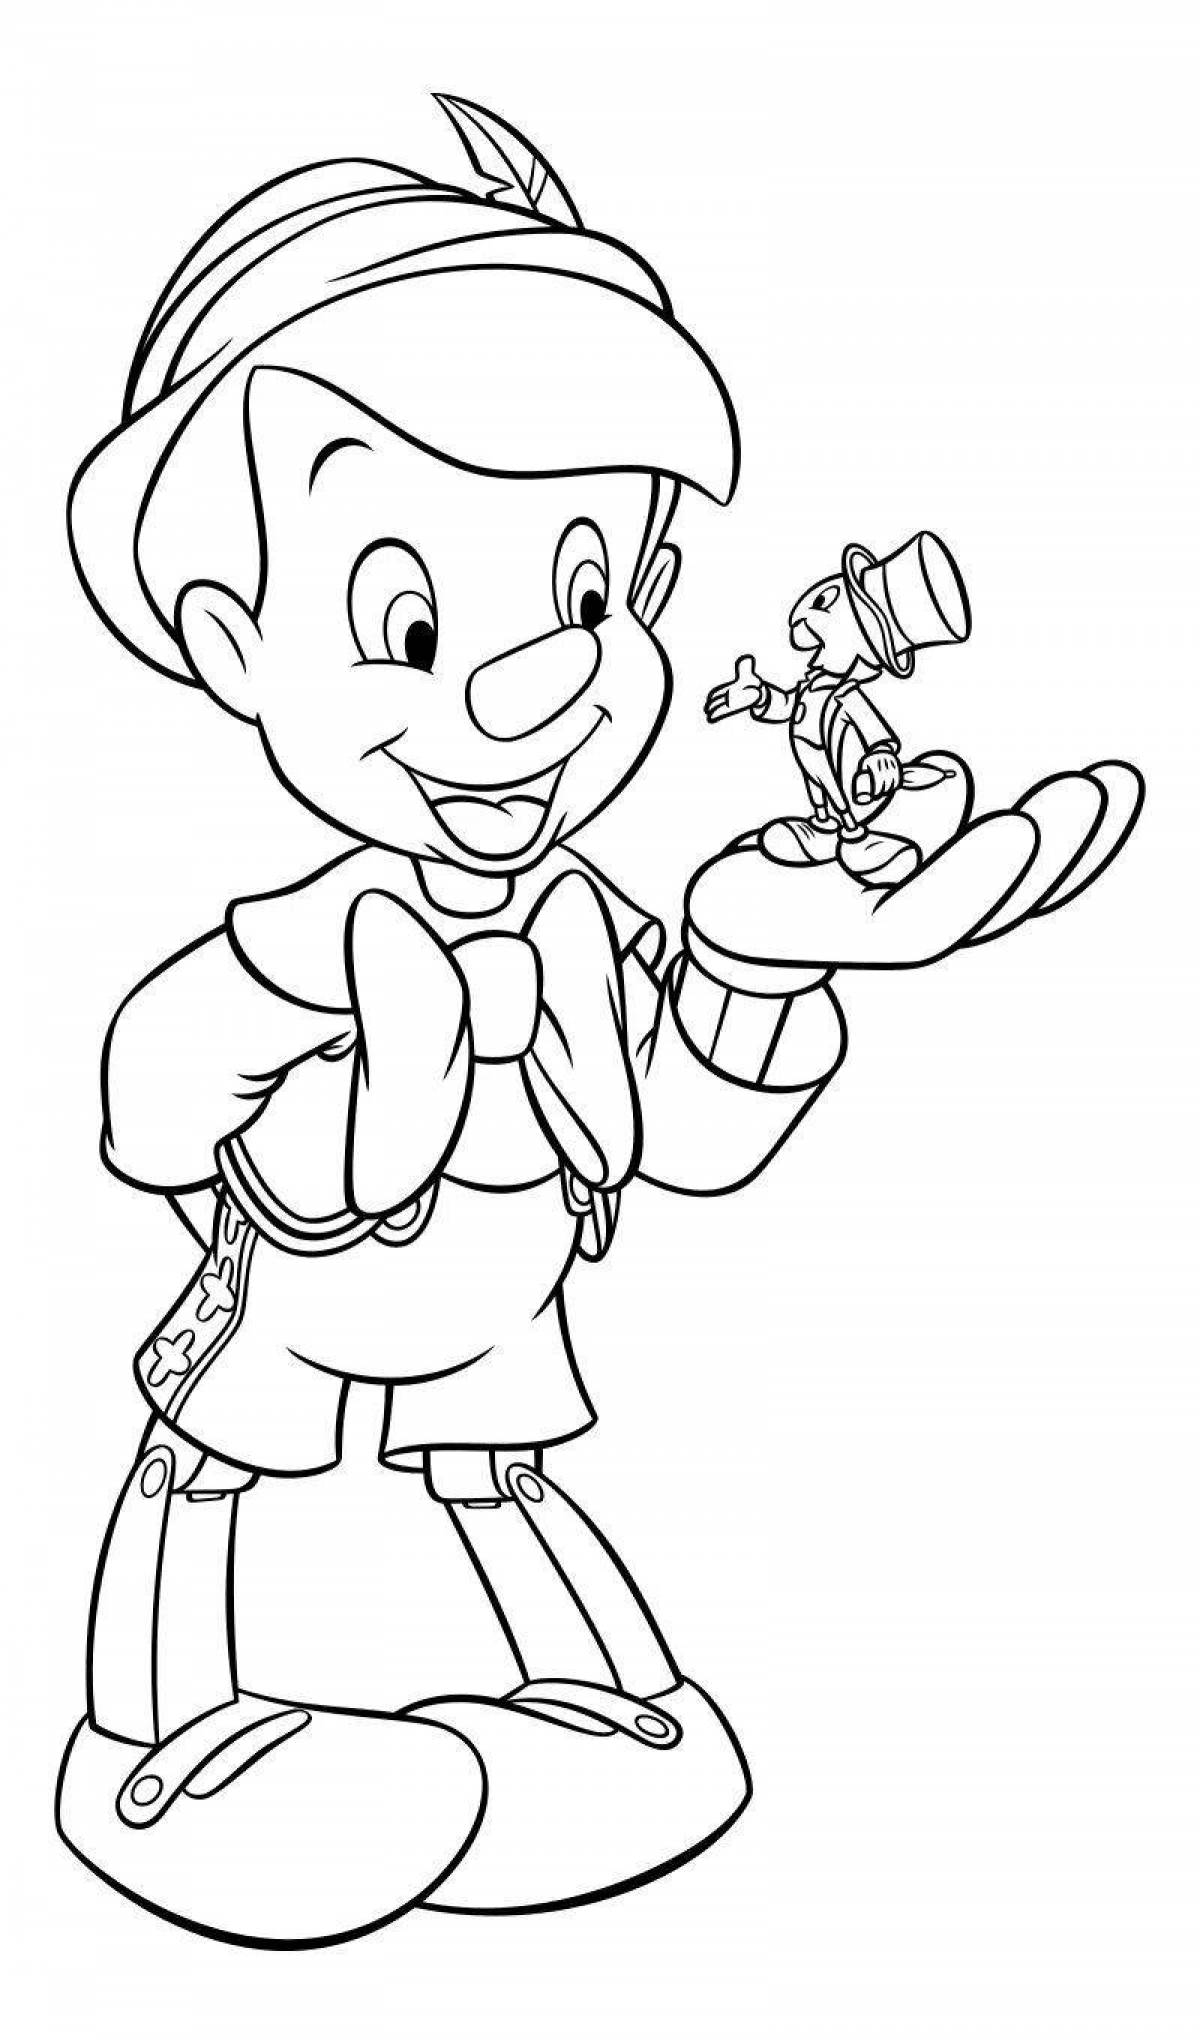 Pinocchio Color Madness Coloring Pages for Kids